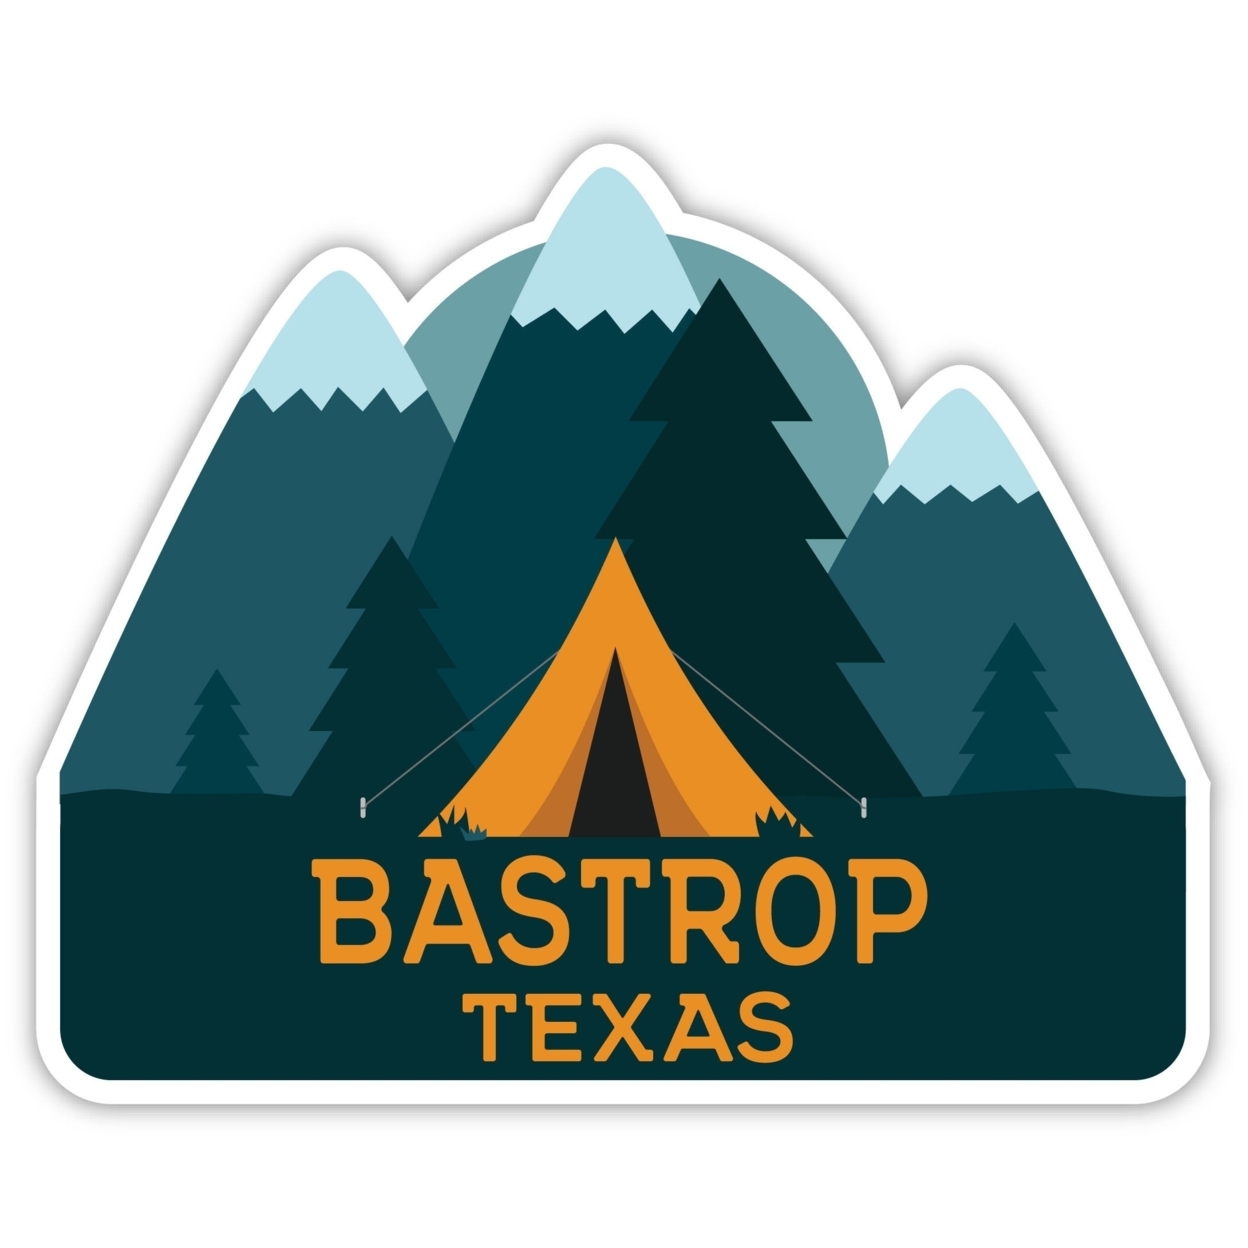 Bastrop Texas Souvenir Decorative Stickers (Choose Theme And Size) - 4-Pack, 4-Inch, Adventures Awaits